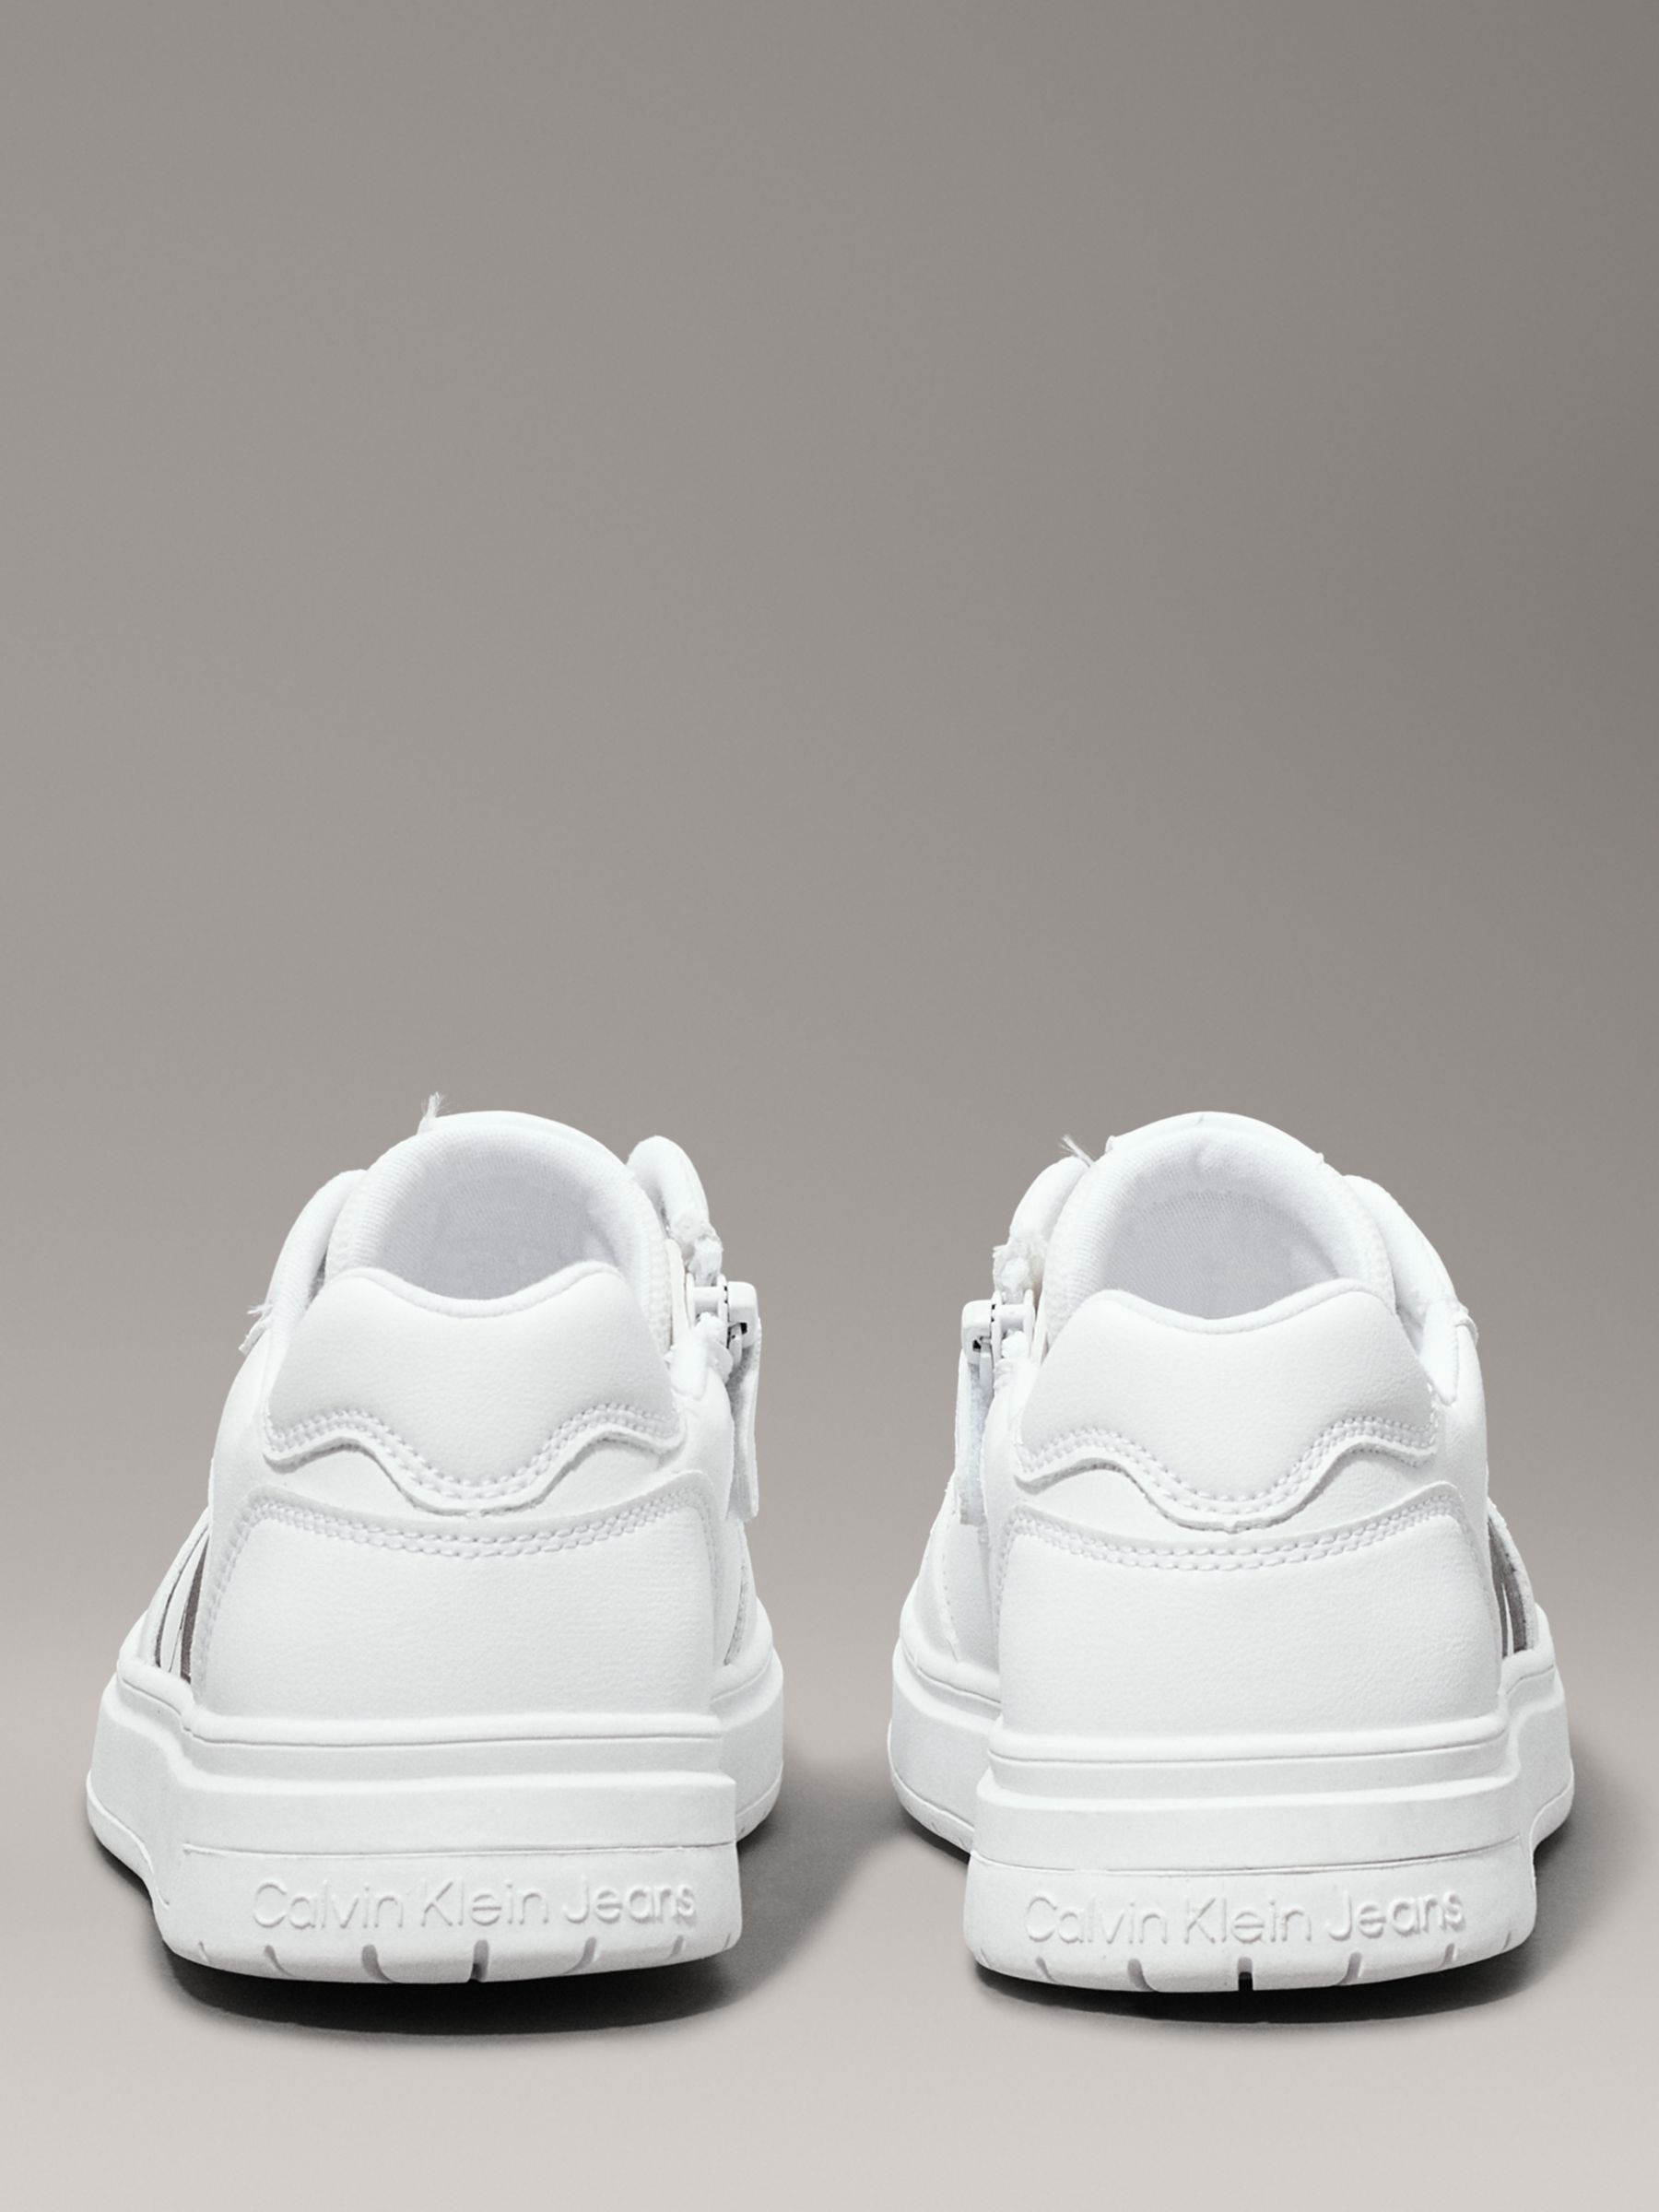 Calvin Klein Kids' CK Low Lace-Up Trainers, White, 11.5 Jnr